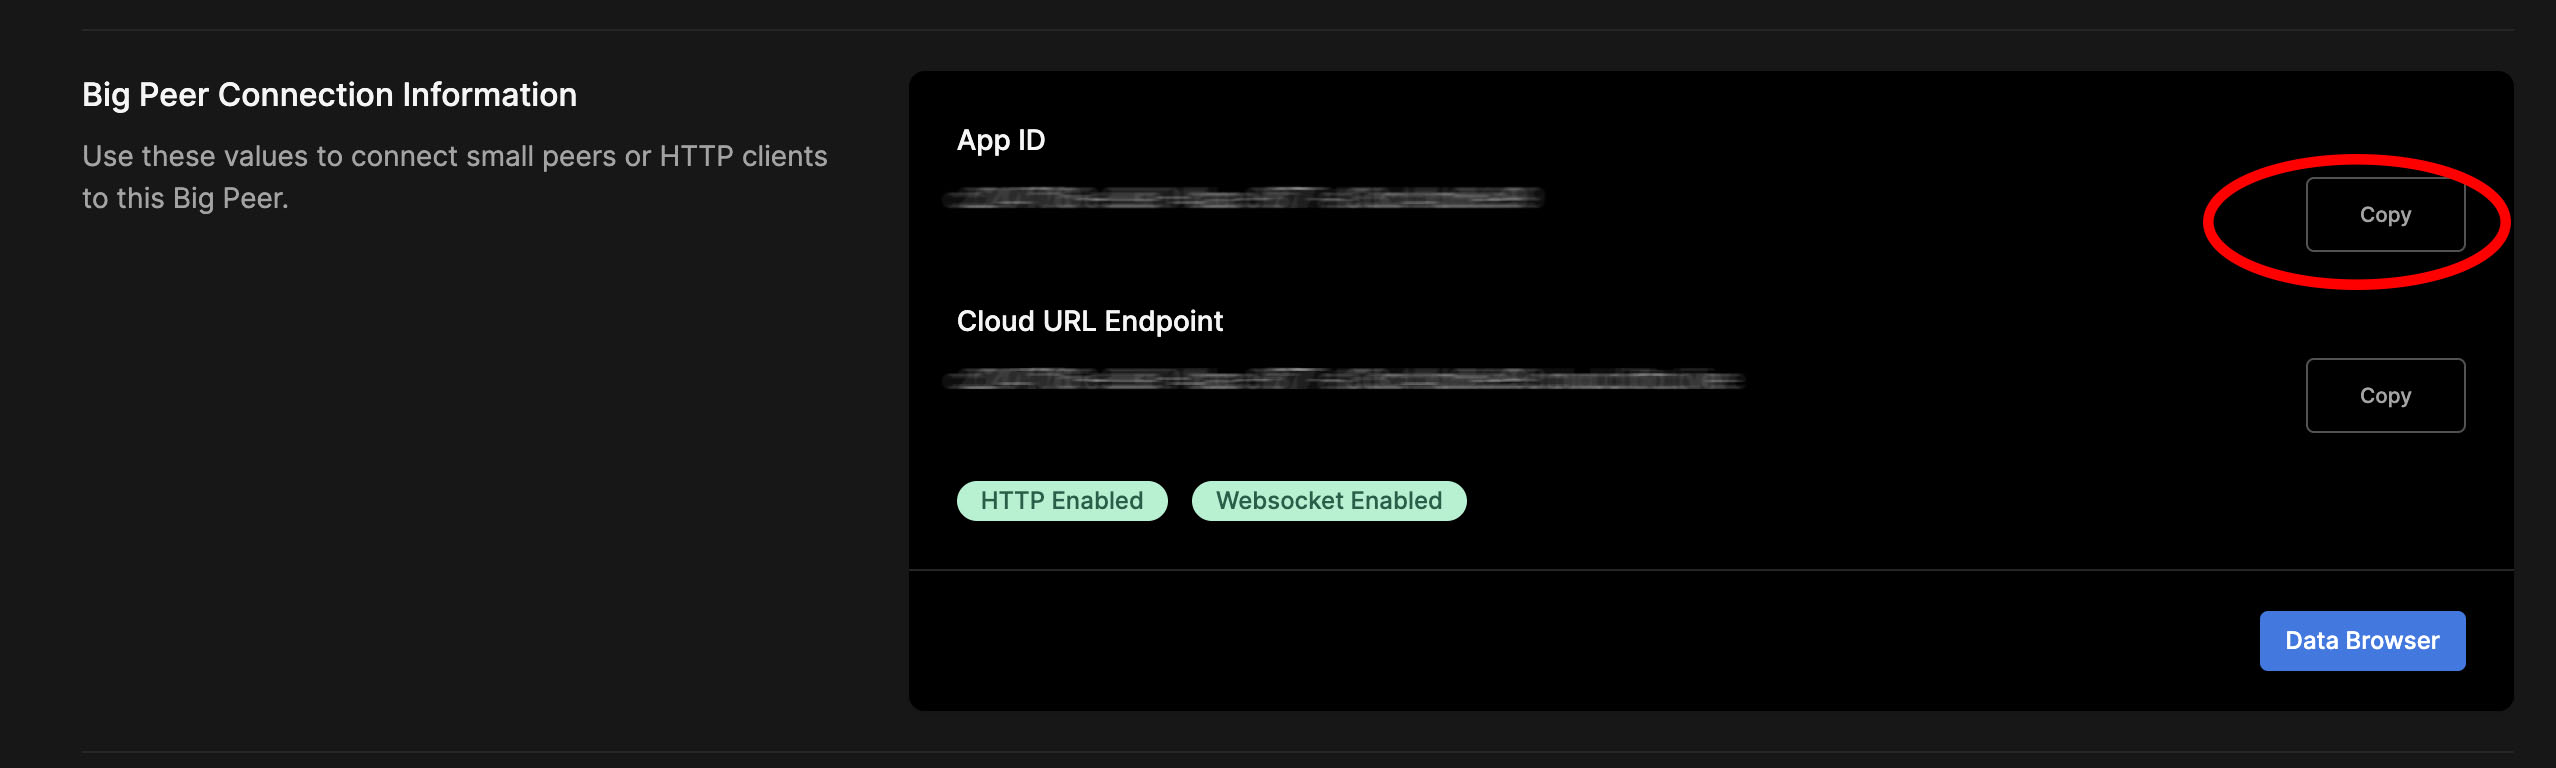 Obtaining the App ID from the portal